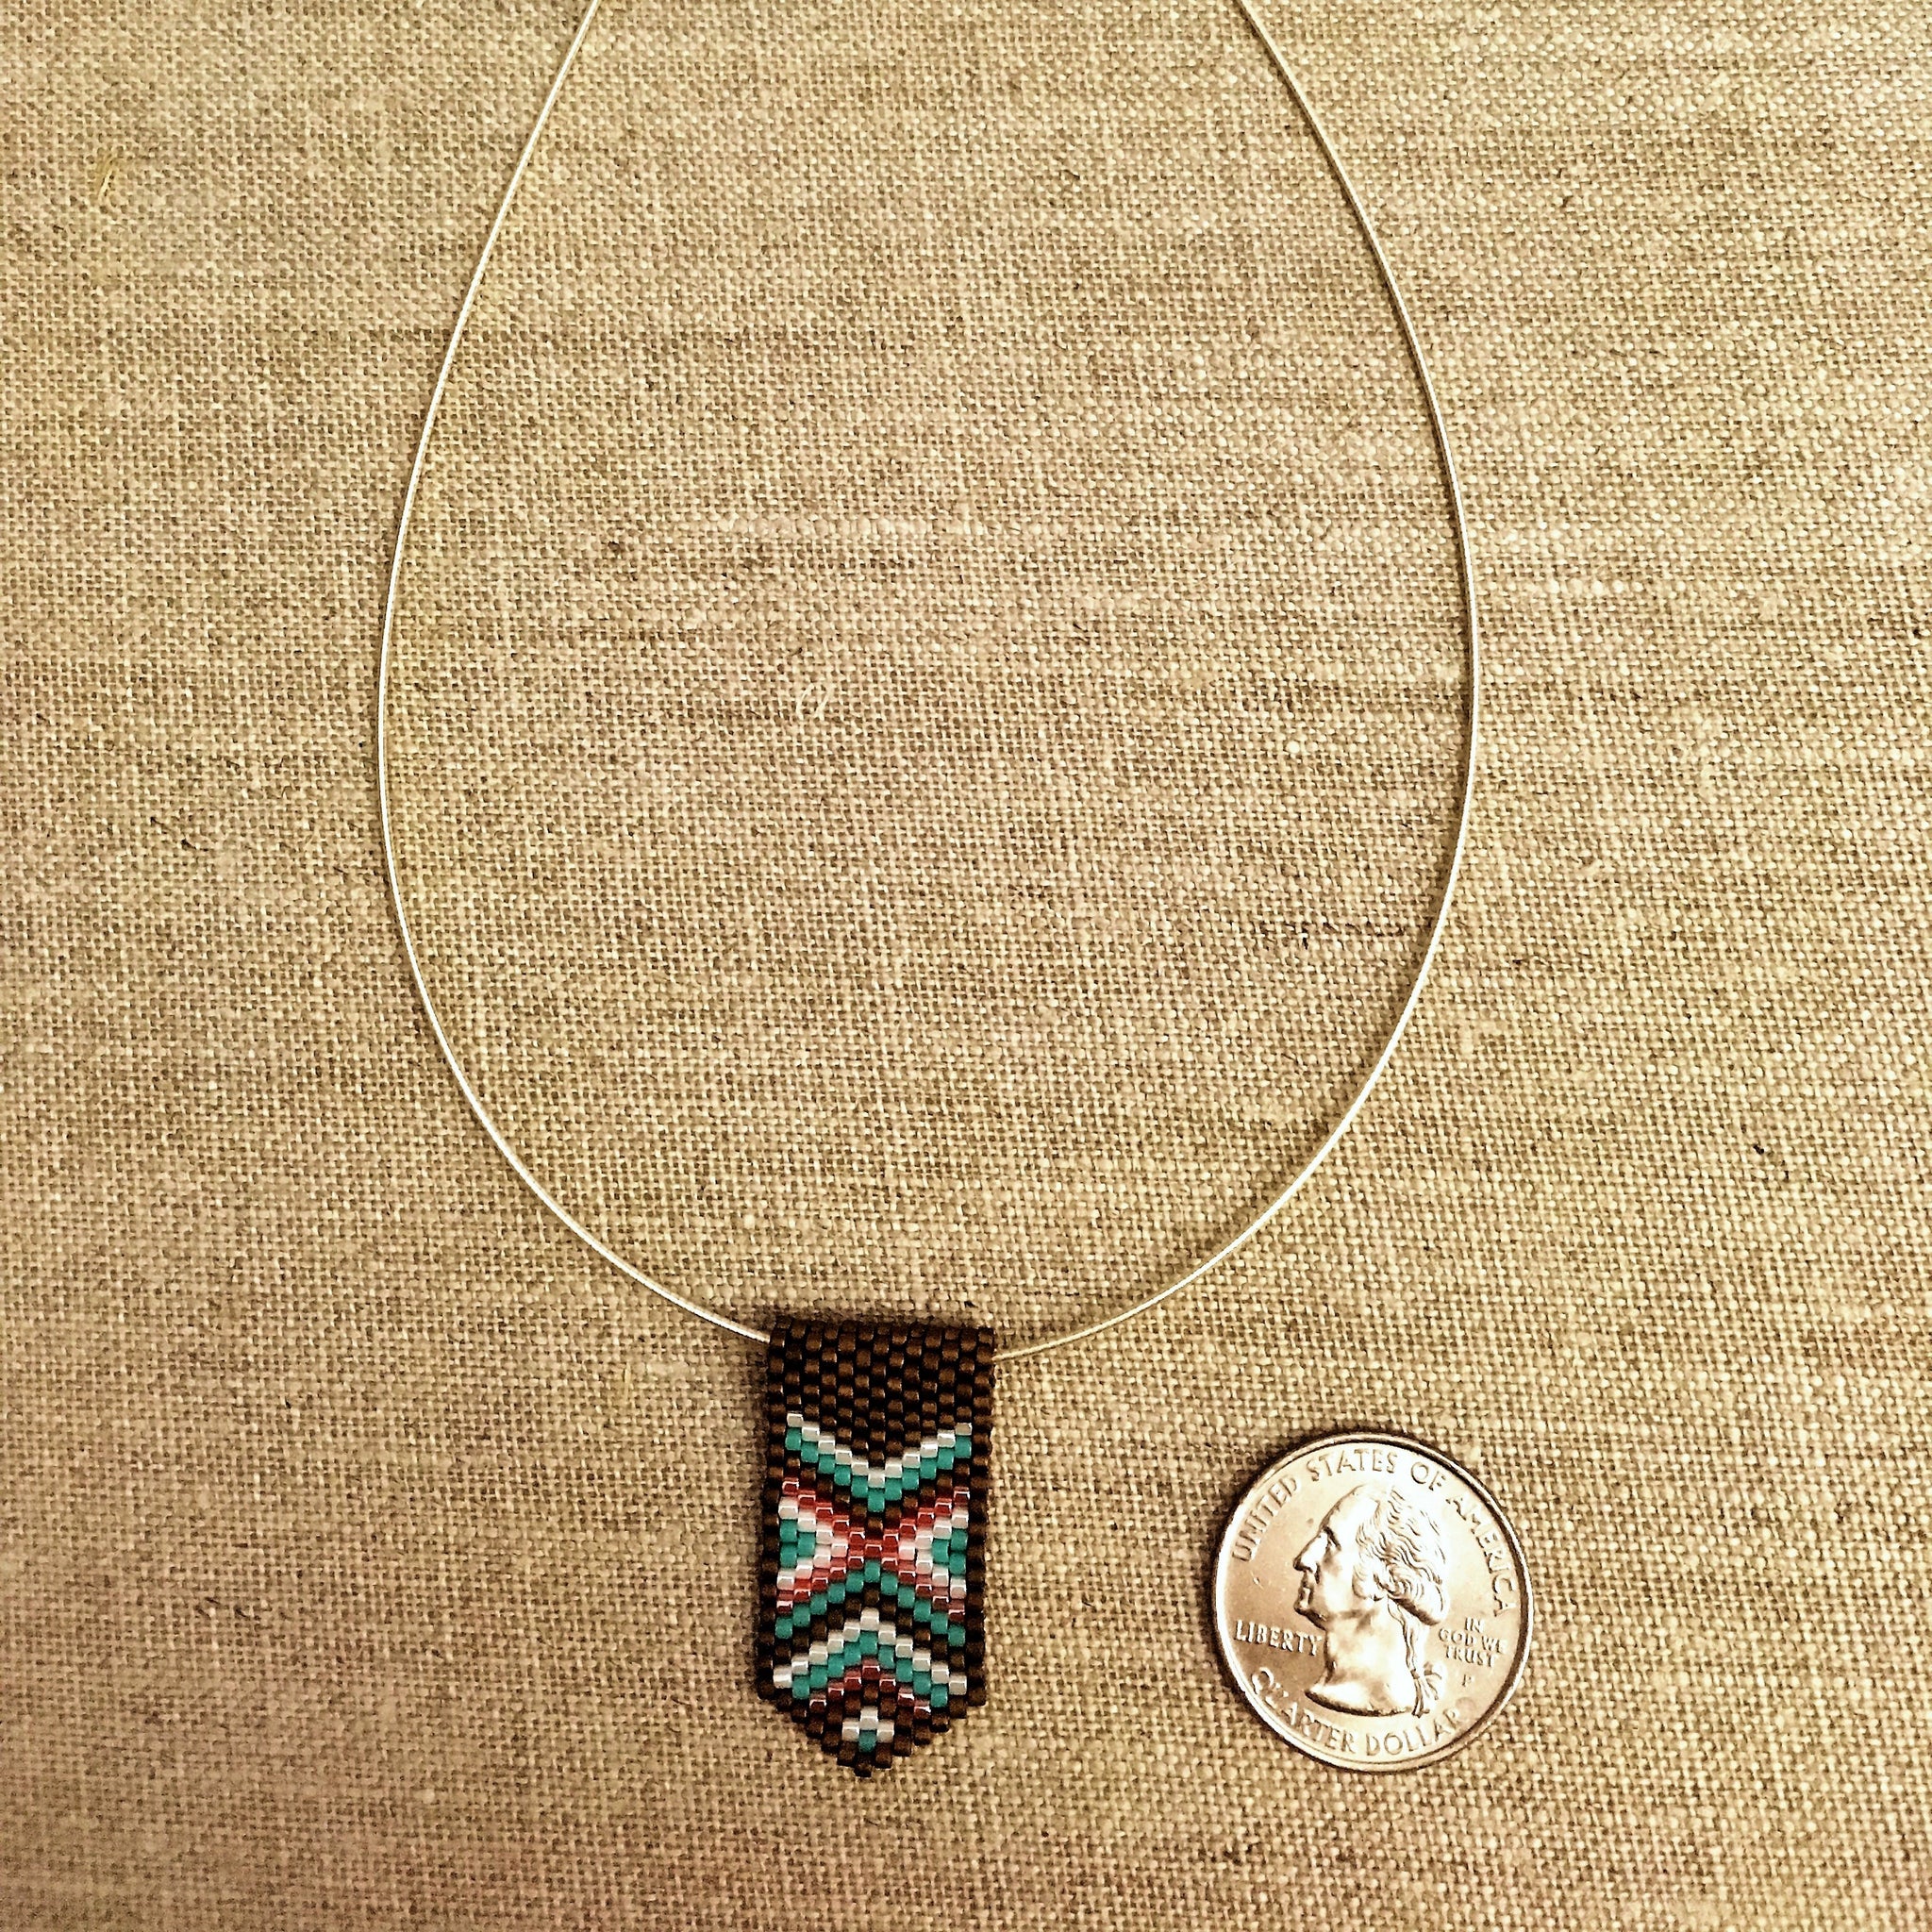 Mini Pendant Necklace in Bronze, Turquoise and Coral